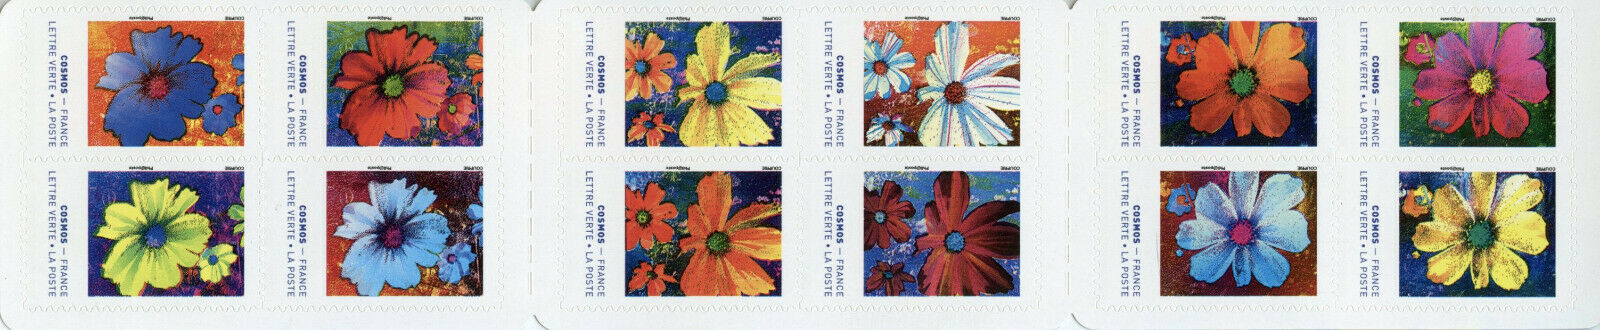 France Flowers Stamps 2020 MNH Cosmos Flower Nature Flora 12v S/A Booklet